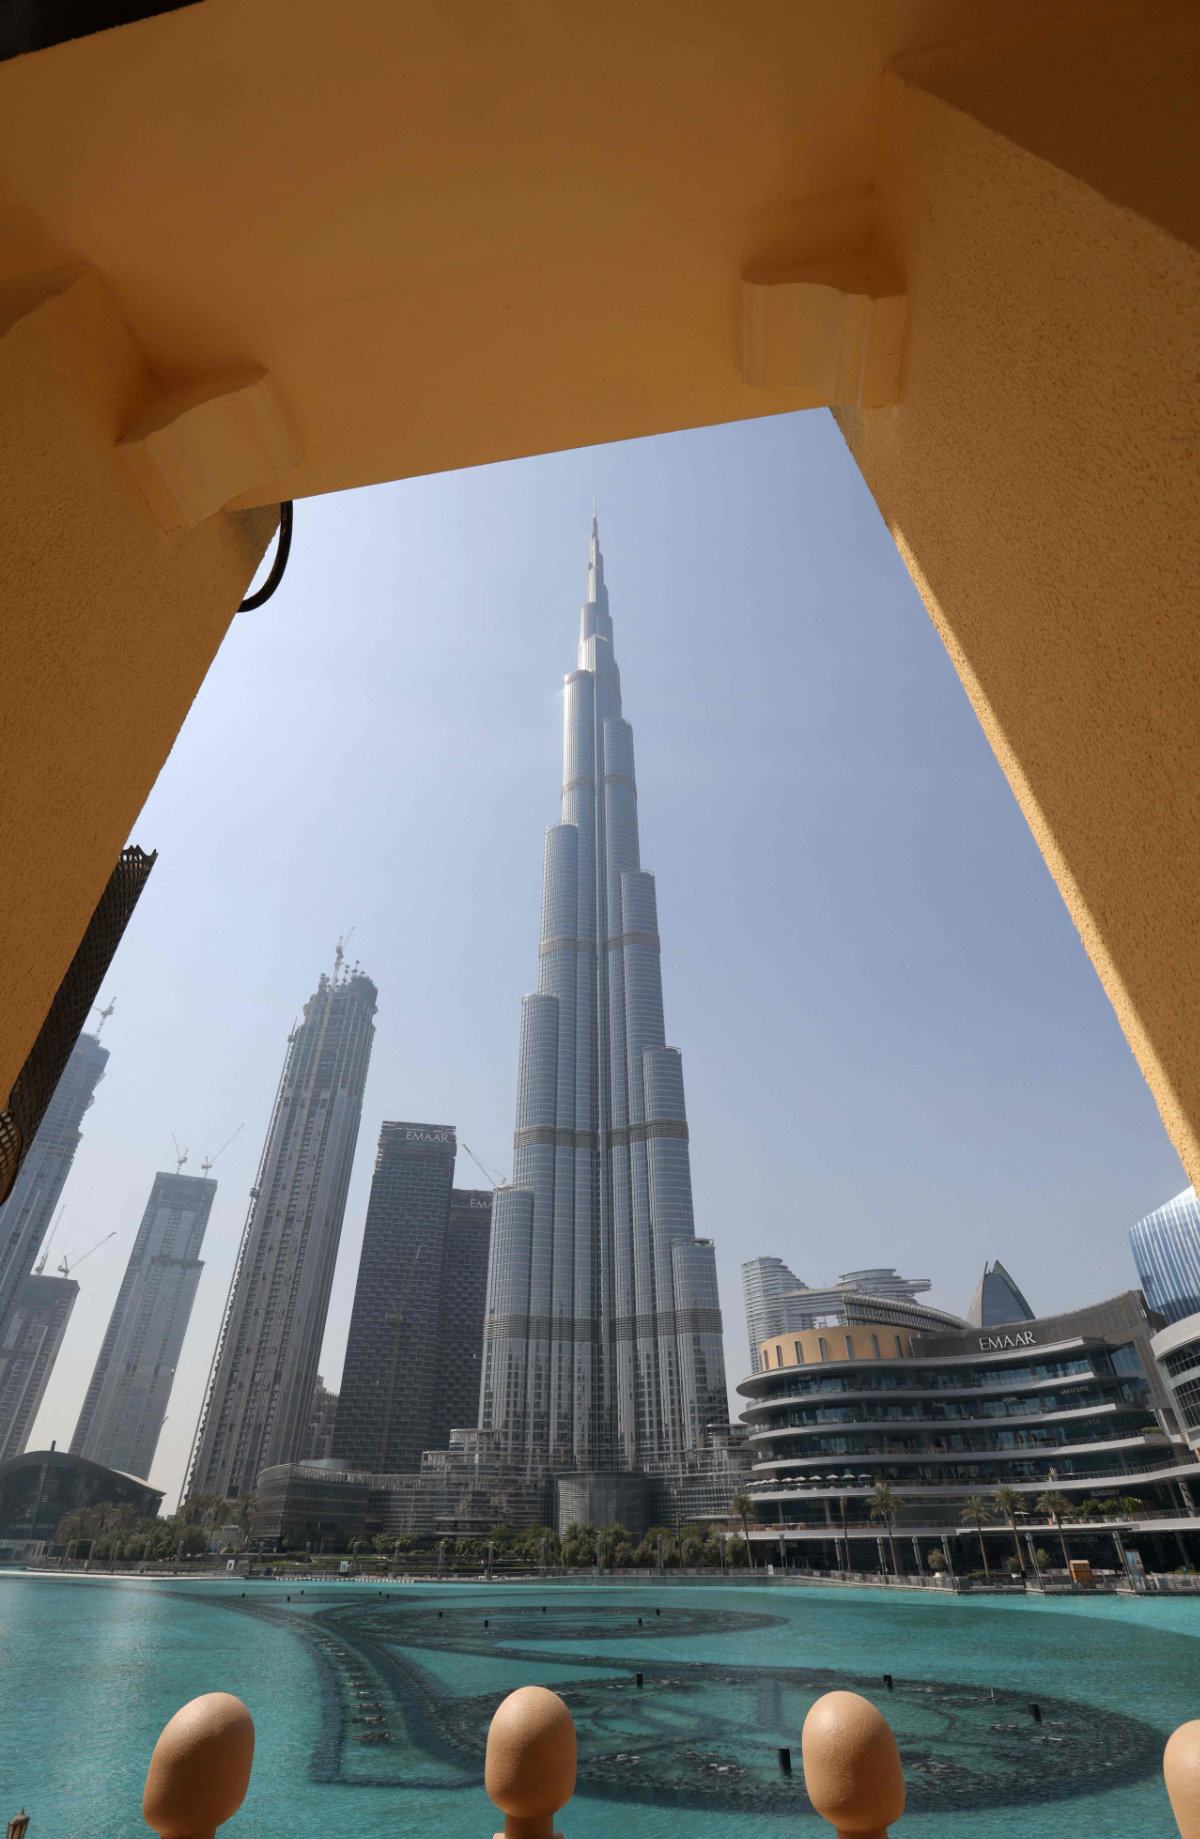 The Burj Khalifa in Dubai is pictured on Sept. 30, 2021 on the day of the Expo 2020 opening. (Photo by Giuseppe Cacace / AFP)